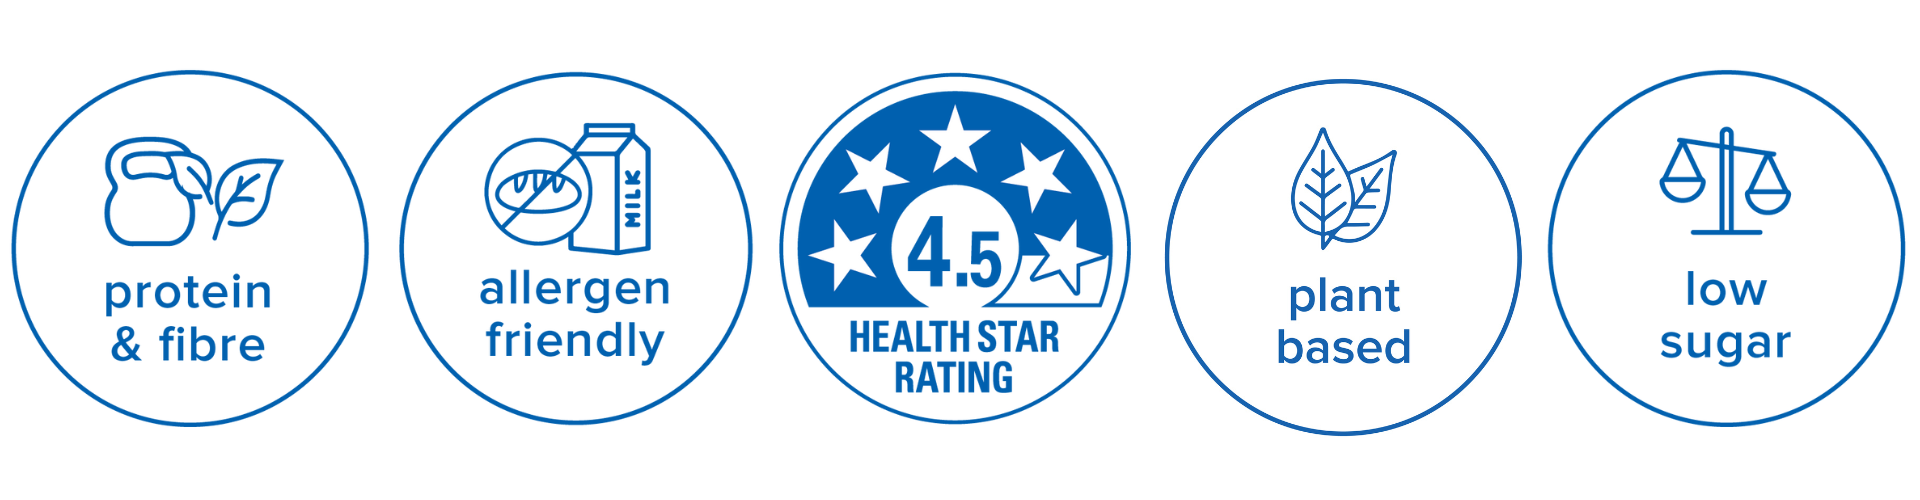 Wisefoods | Circular icons blue on white, reading left to right - Protein & Fibre, Allergen friendly, 4.5 Health Star Rating, Plant Based options, and Low Sugar